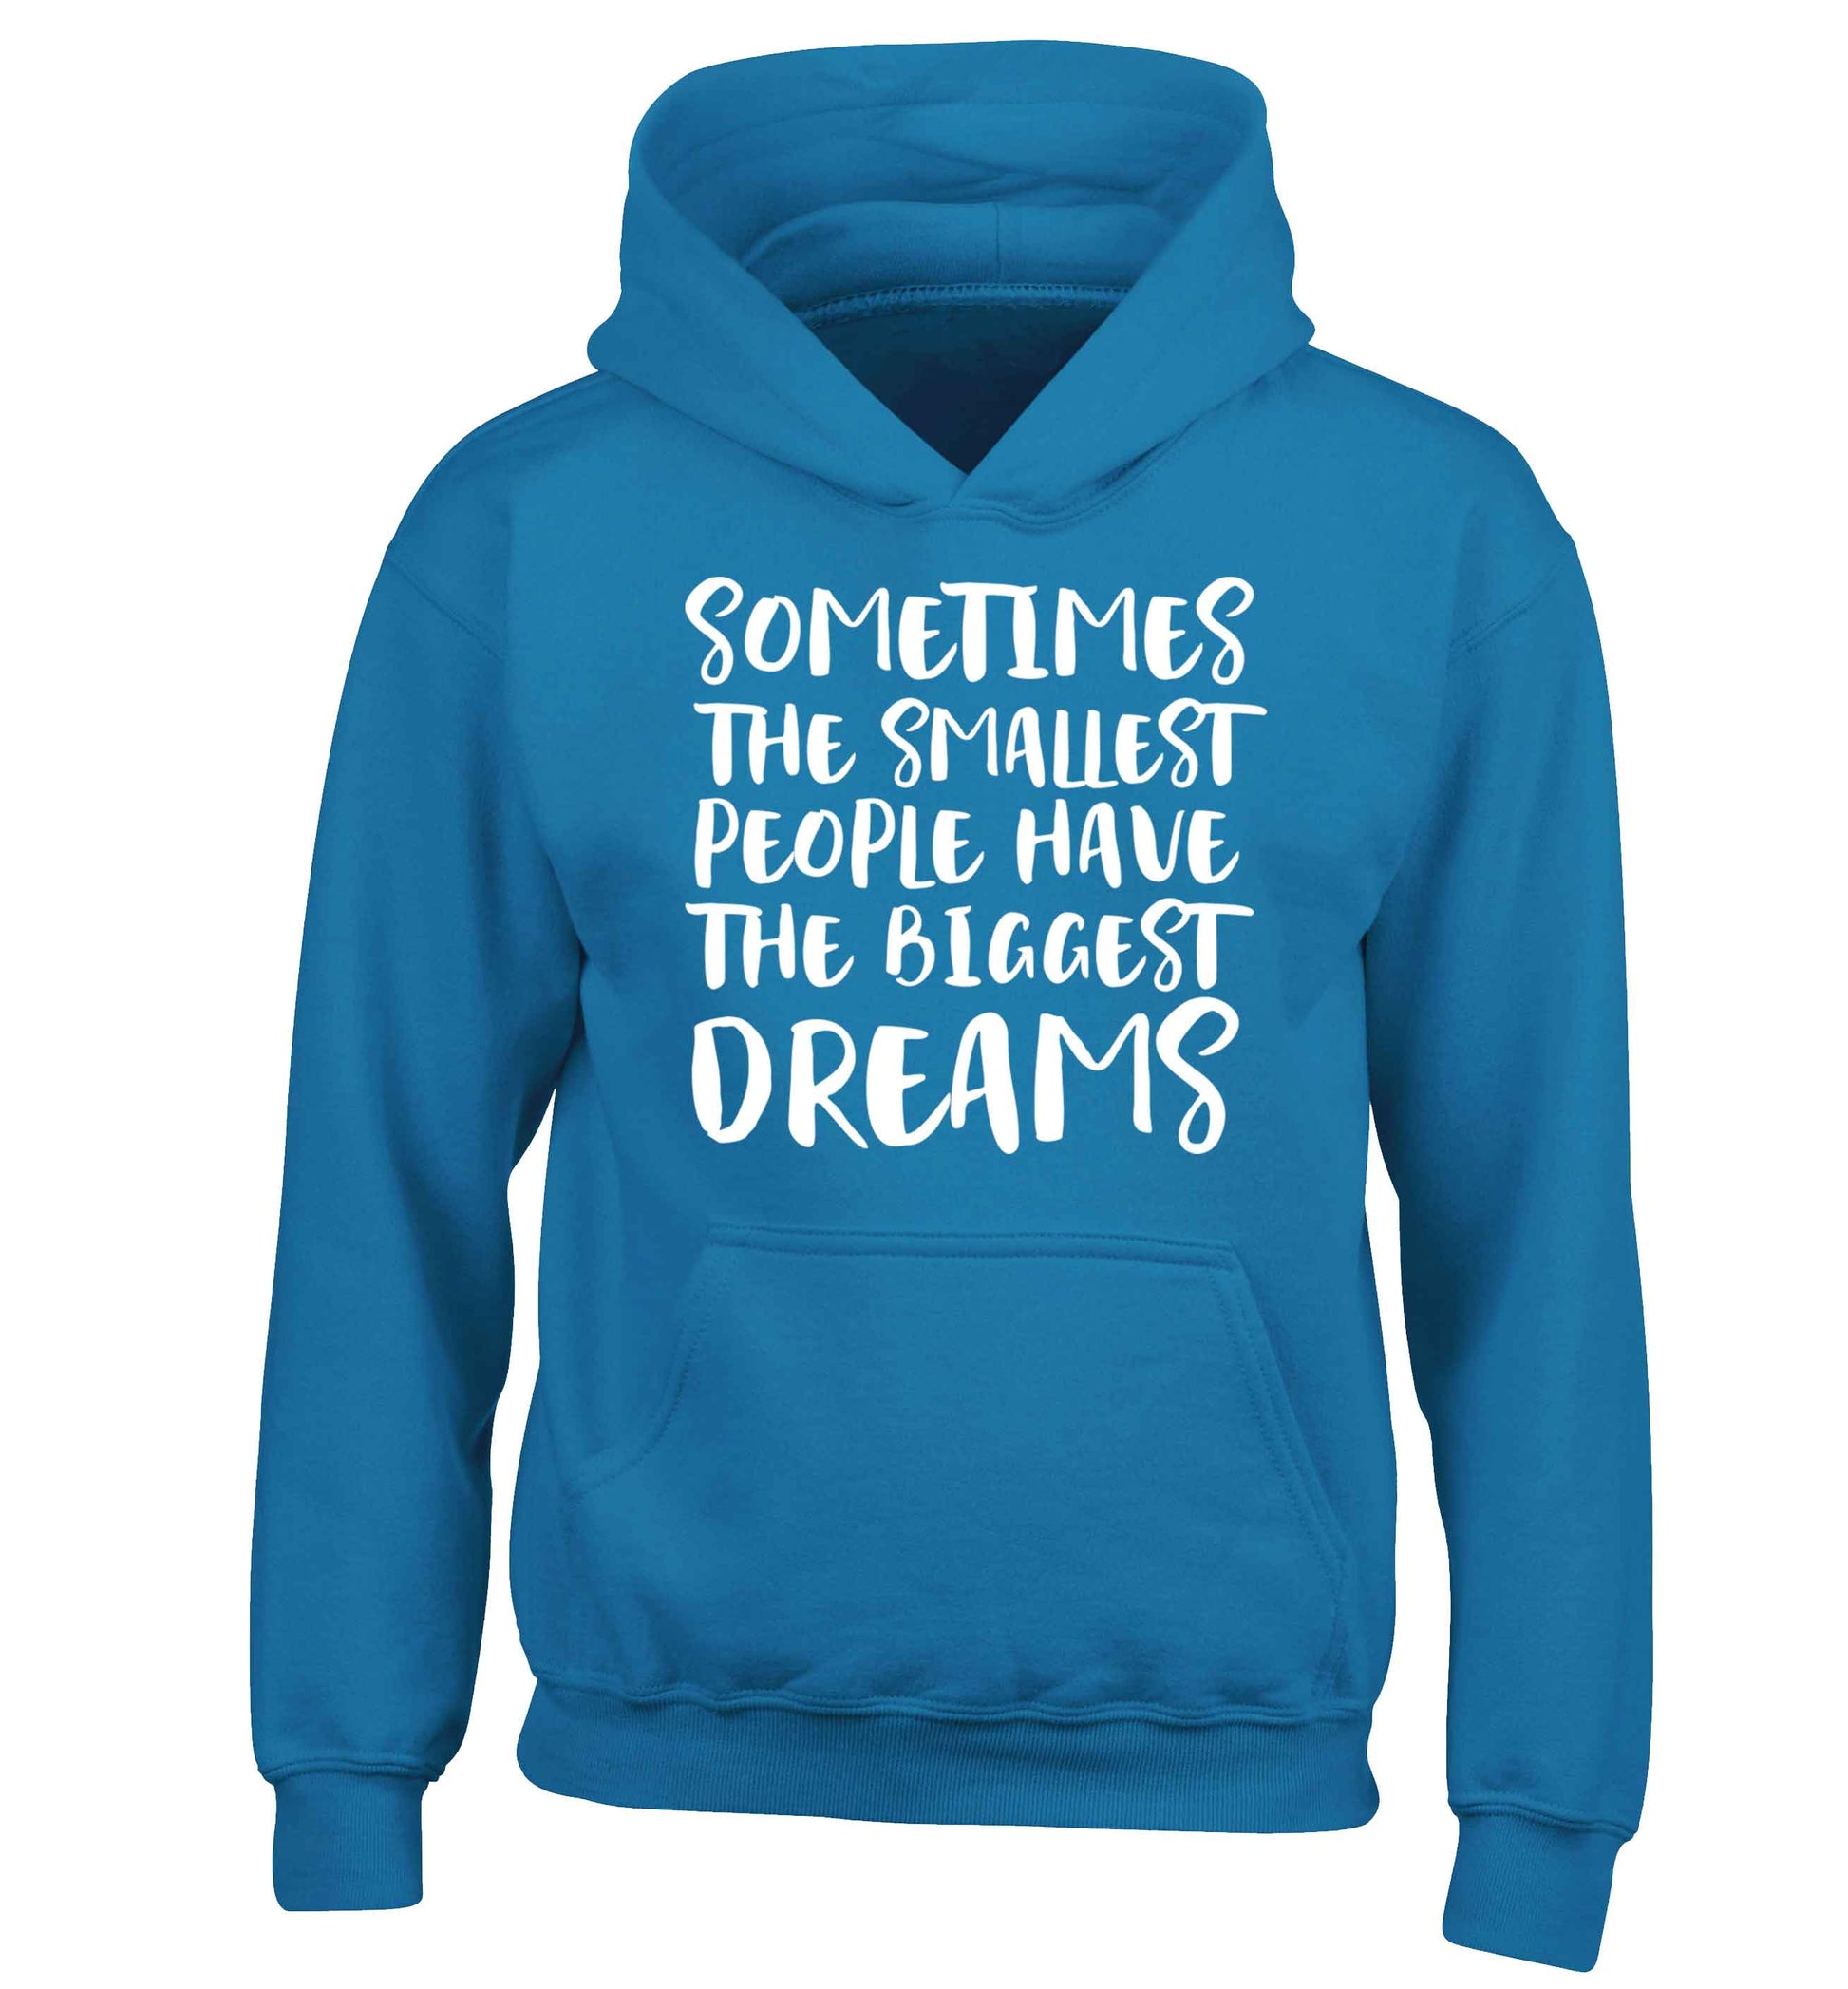 Sometimes the smallest people have the biggest dreams children's blue hoodie 12-13 Years